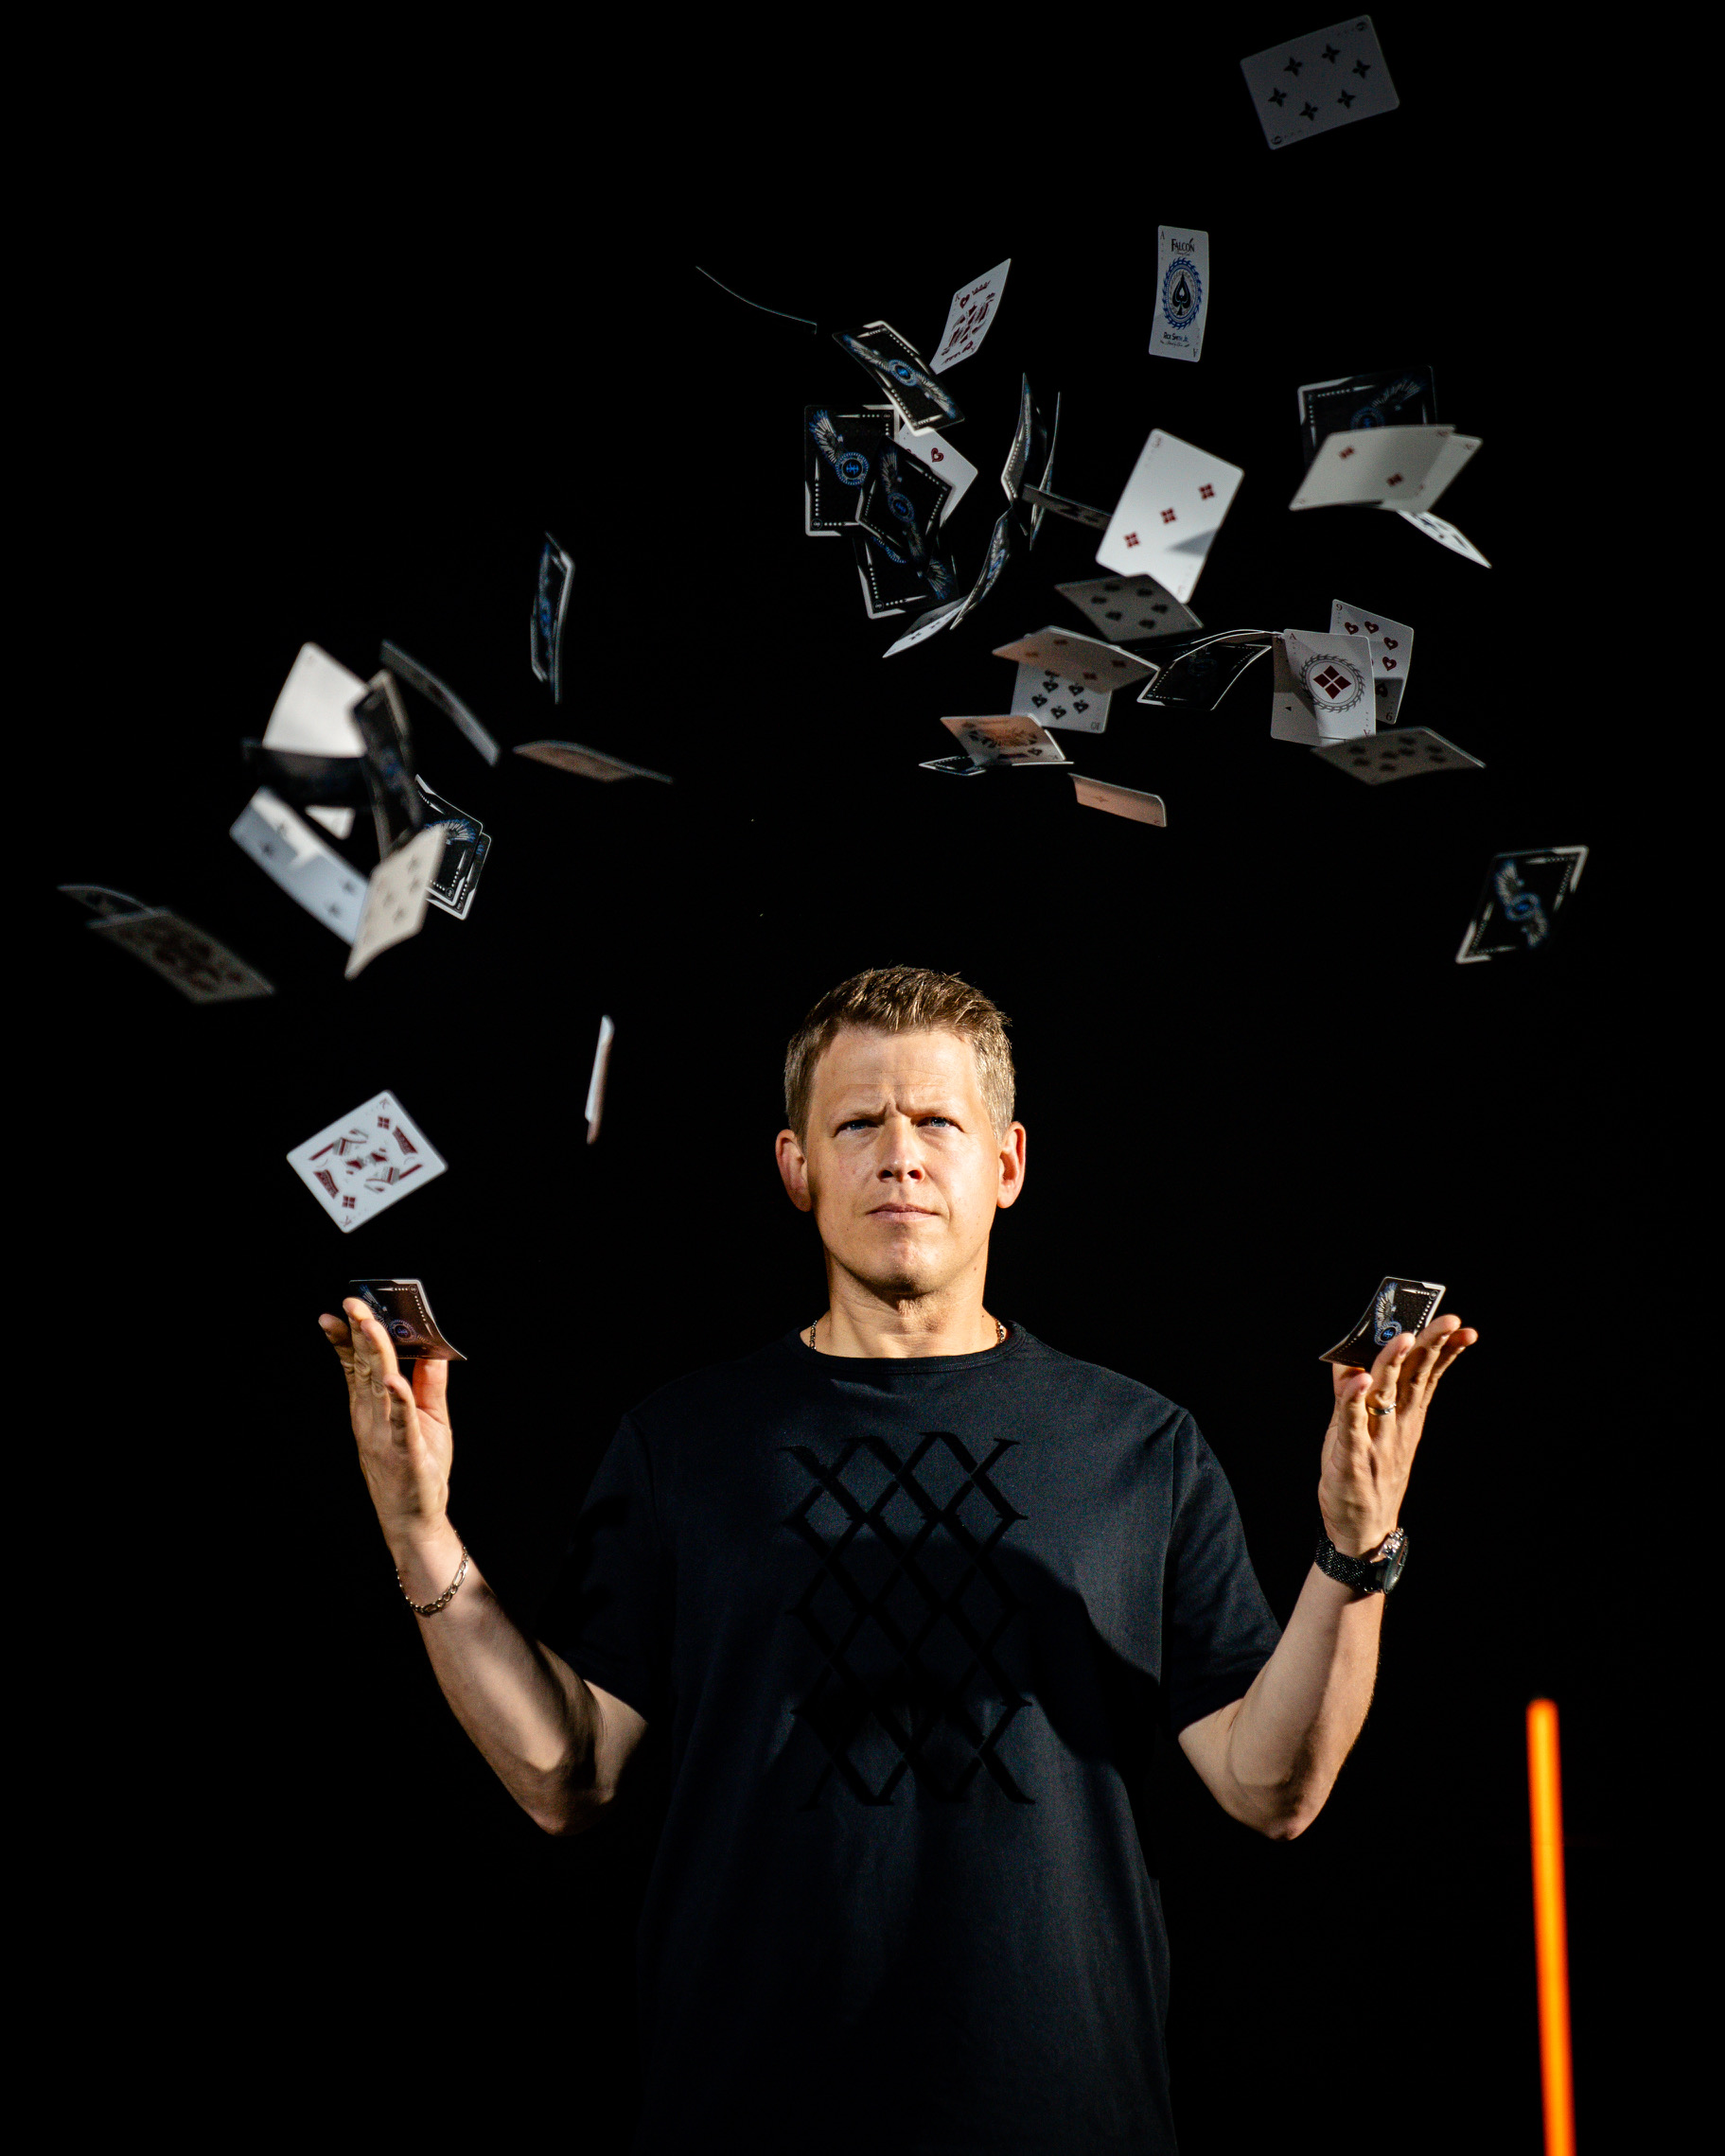 World-Famous Magician and Card-Thrower Rick Smith Jr. Teams Up with